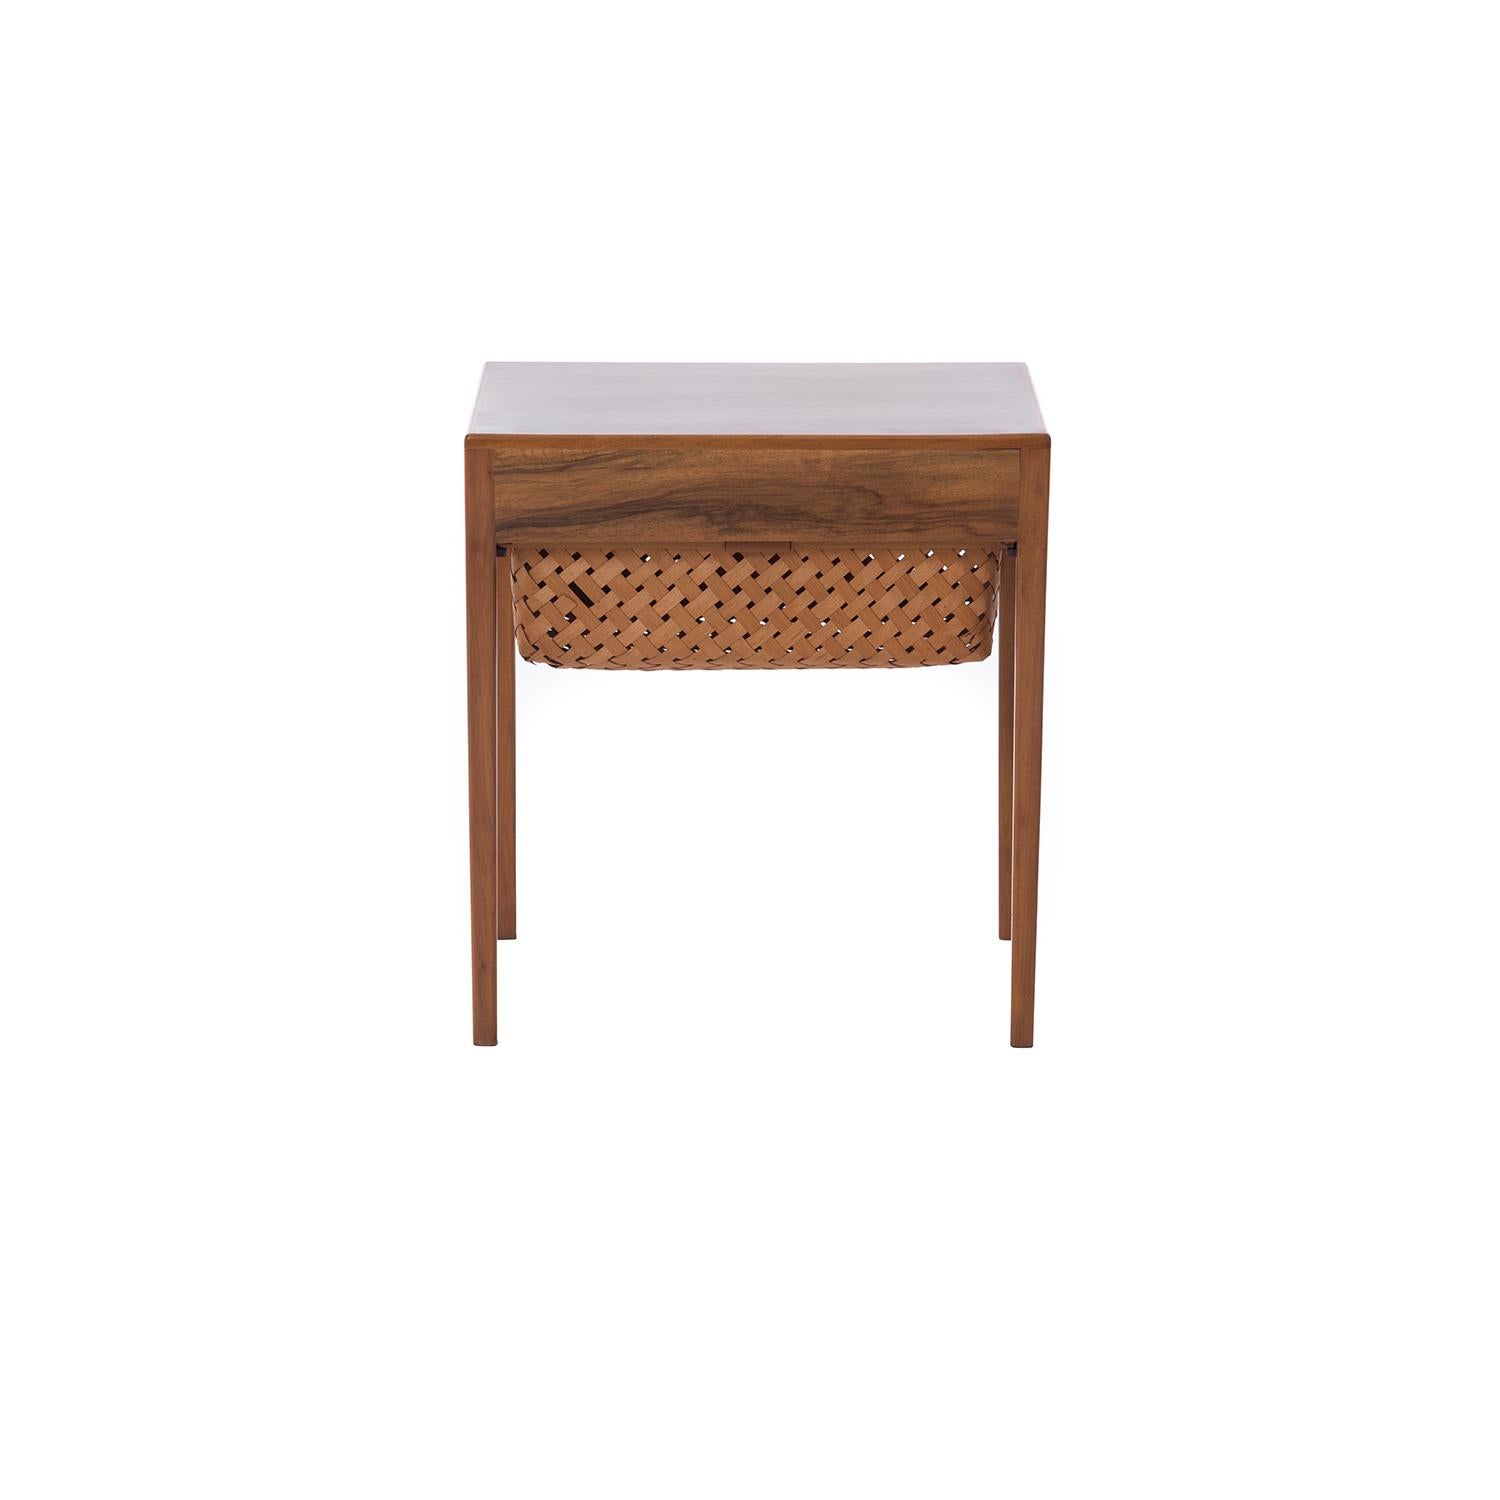 Lacquered Transitional Scandinavian Modern Mahogany Sewing Table with Drawer and Basket